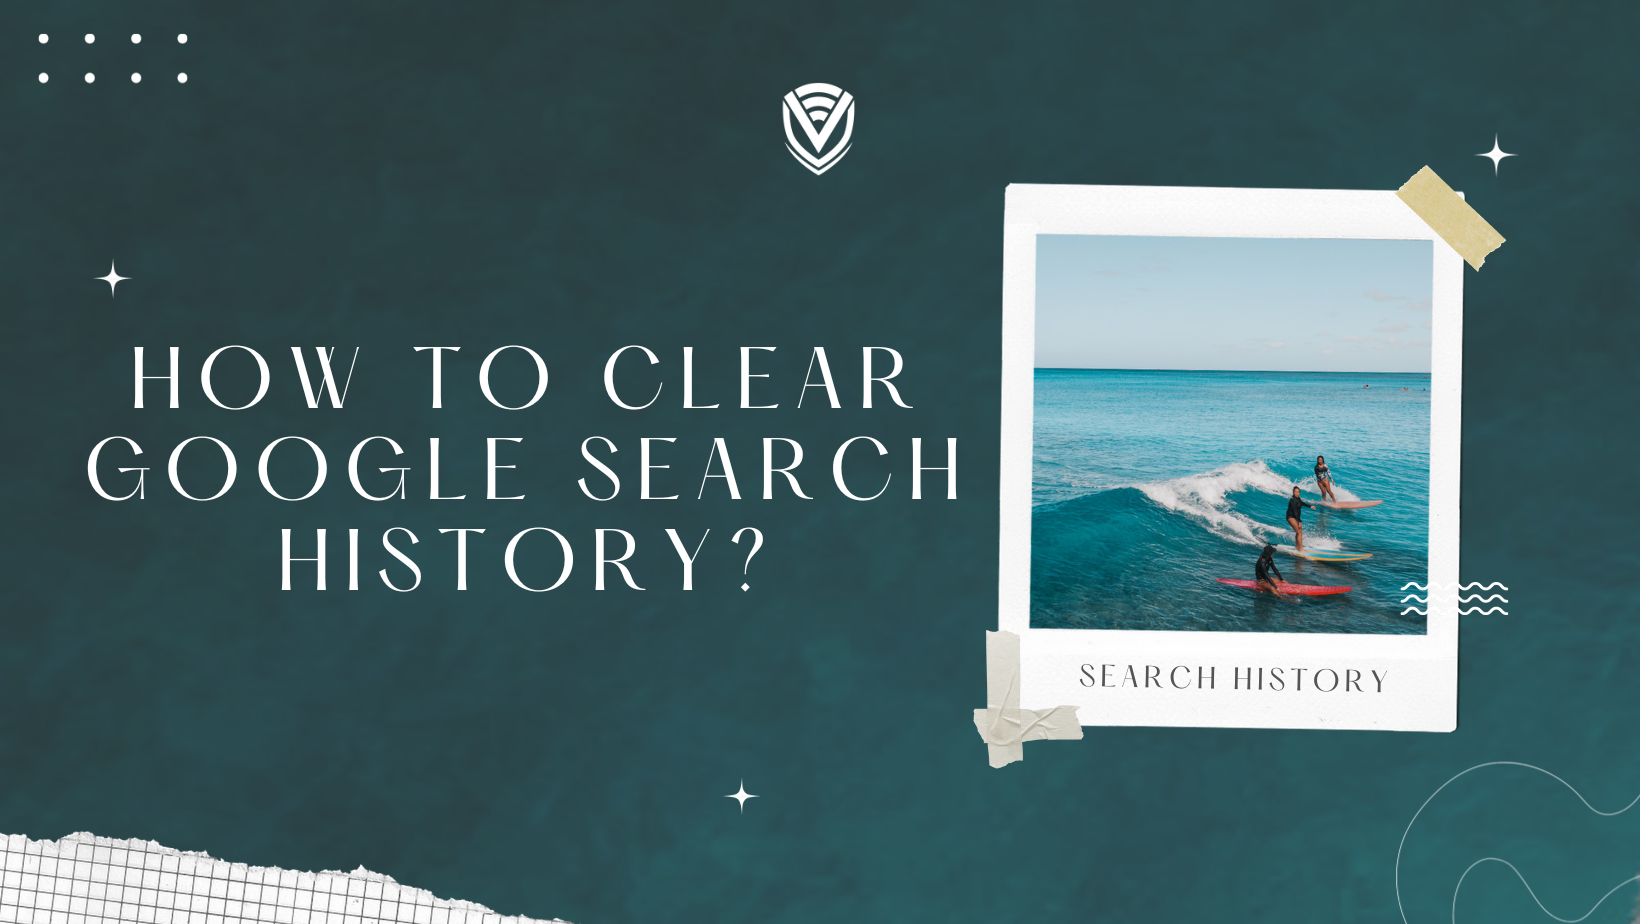 How to clear Google search history in all browsers?